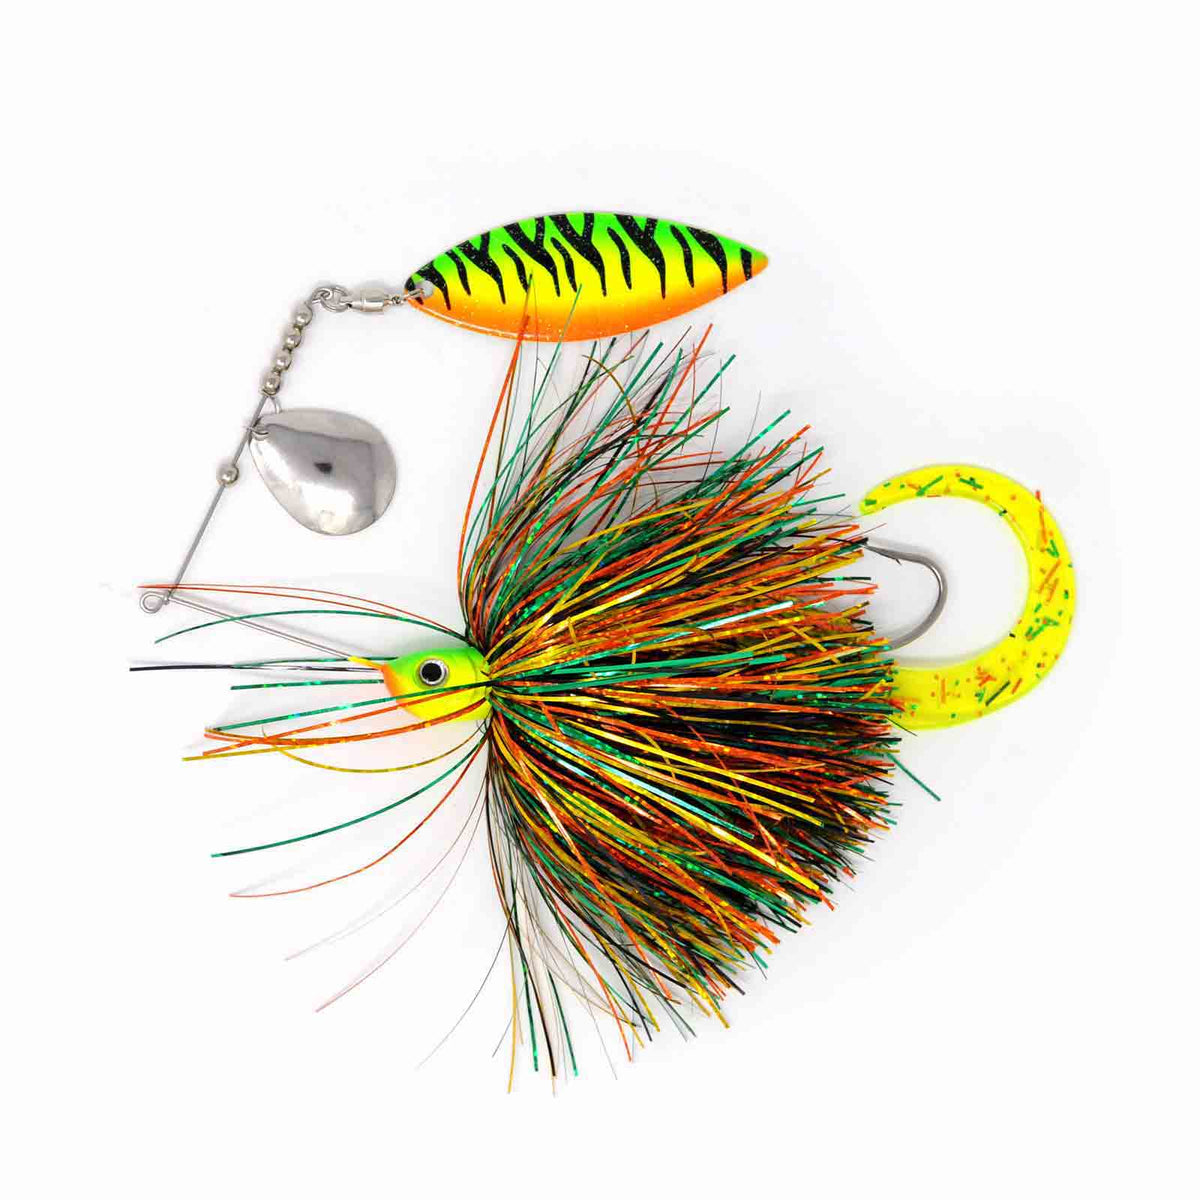 View of Spinnerbaits Esox Assault Spinnerbait Willow 1oz Fire Tiger available at EZOKO Pike and Musky Shop